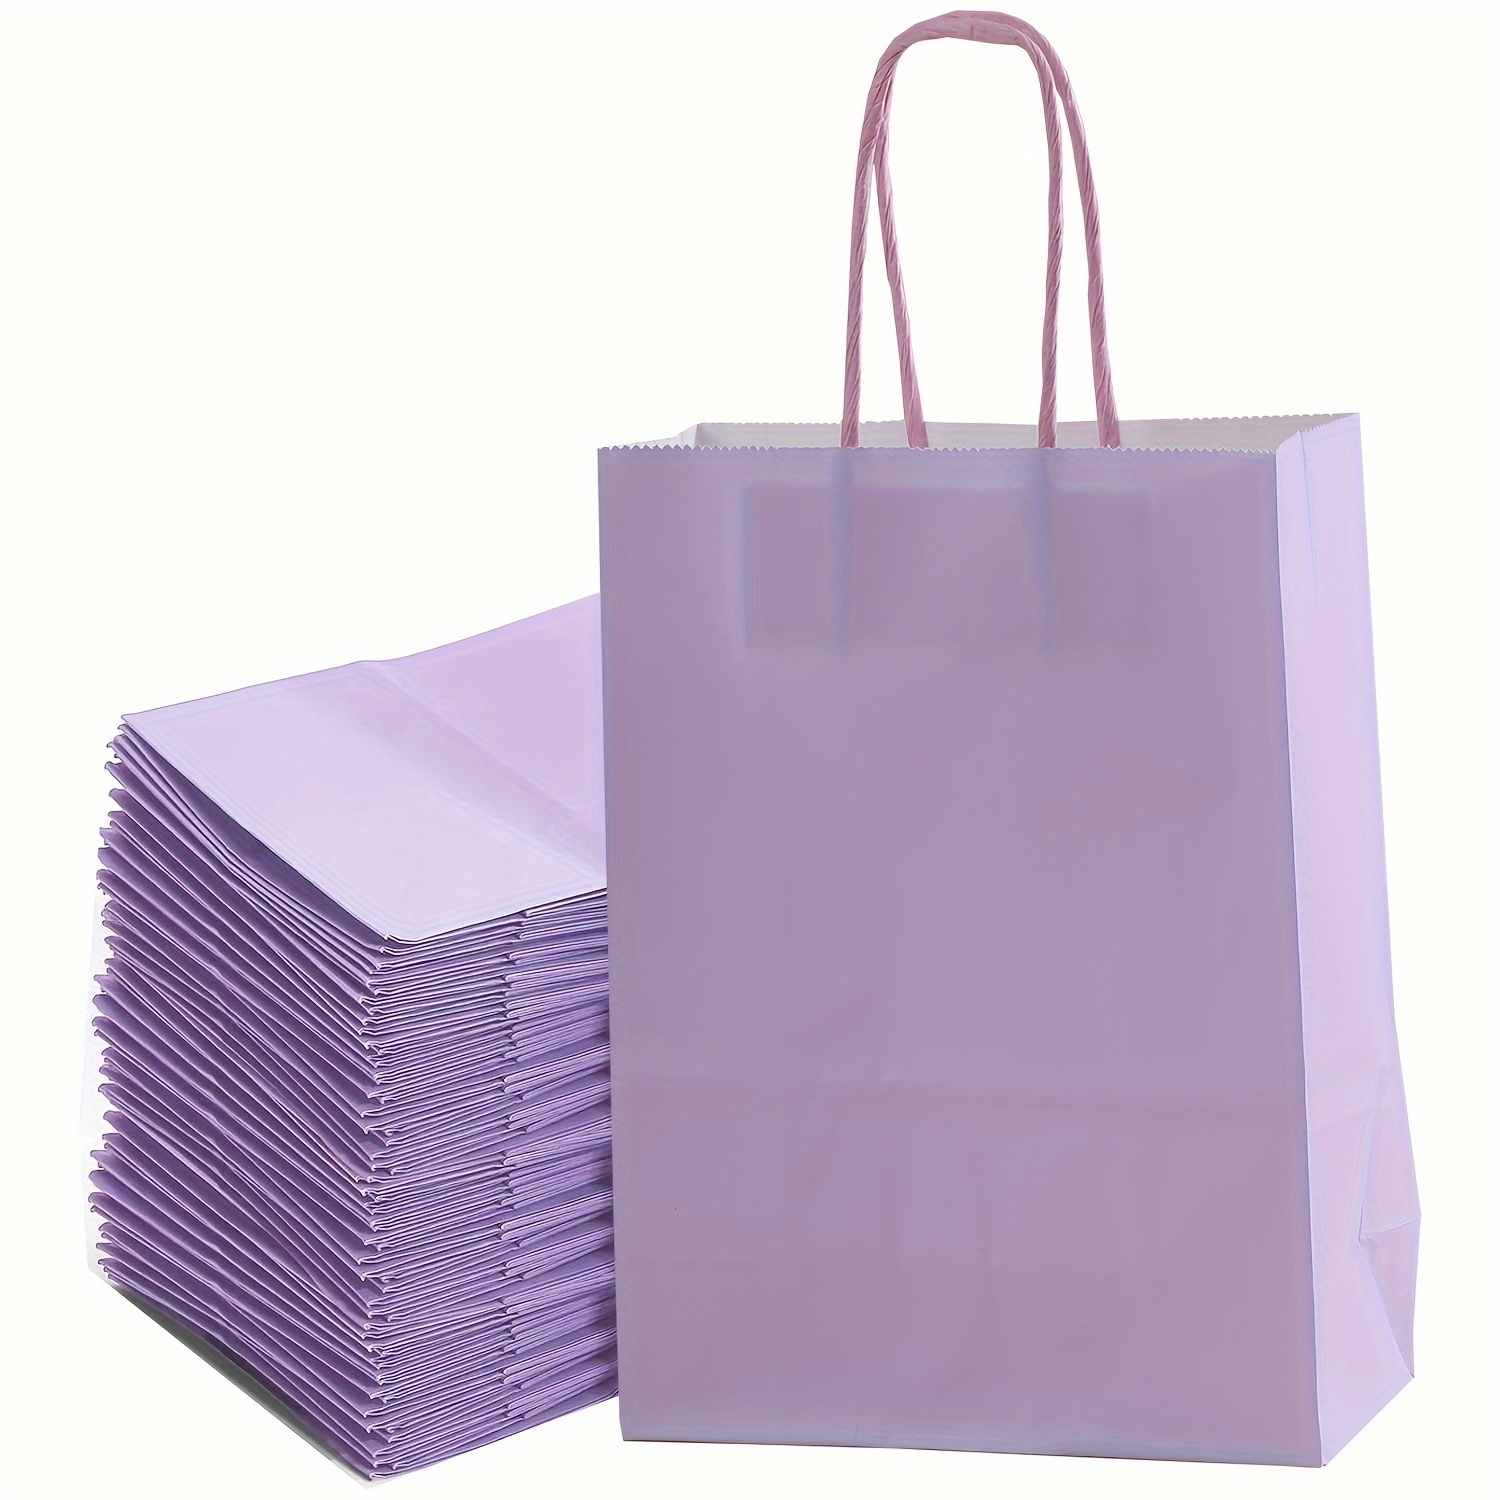 

24-piece Light Purple Gift Bags - 6.3x8.7x3.1" Reusable Party Favor & Shopping For Birthdays, Weddings, And More